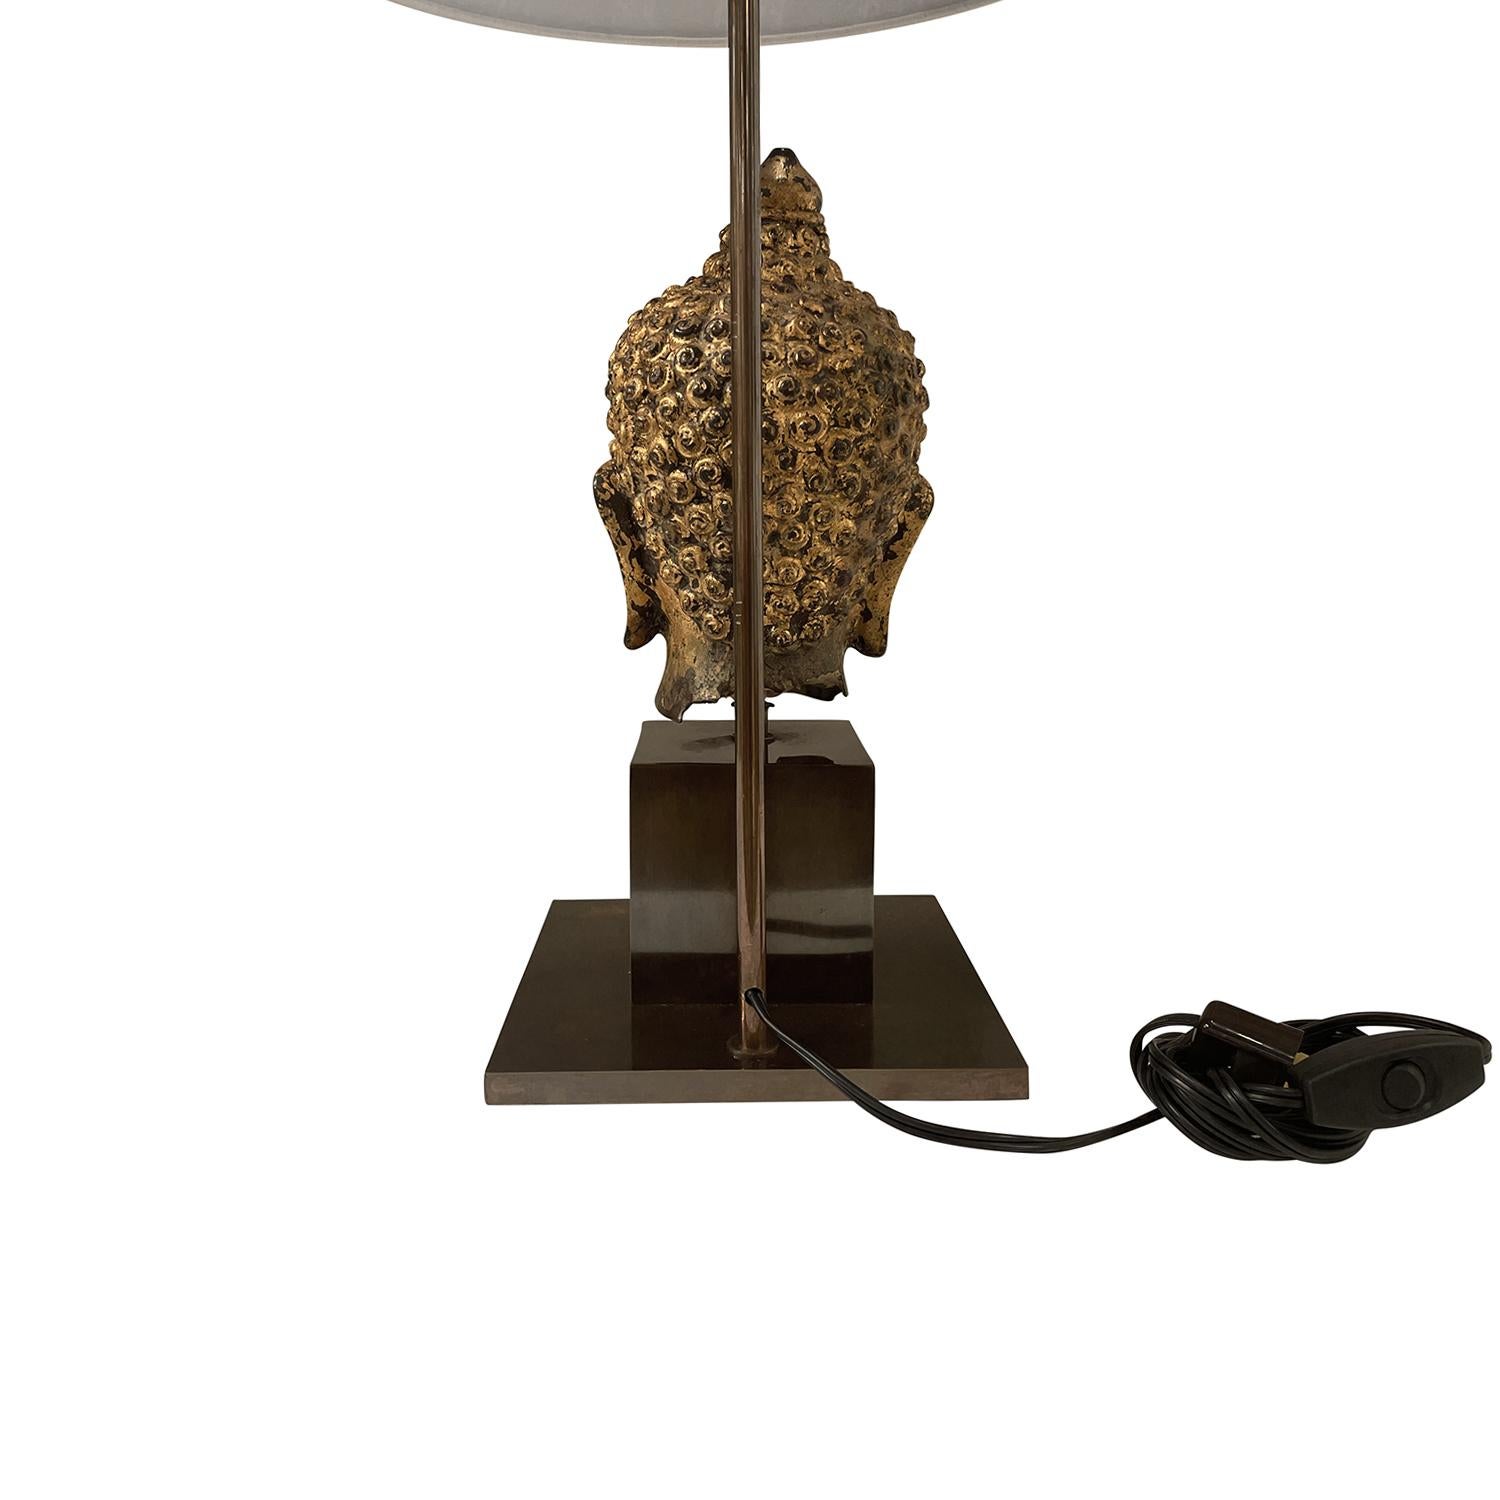 20th Century Gold Asian Metal Buddha Table Lamp, Vintage Wood Light For Sale 3